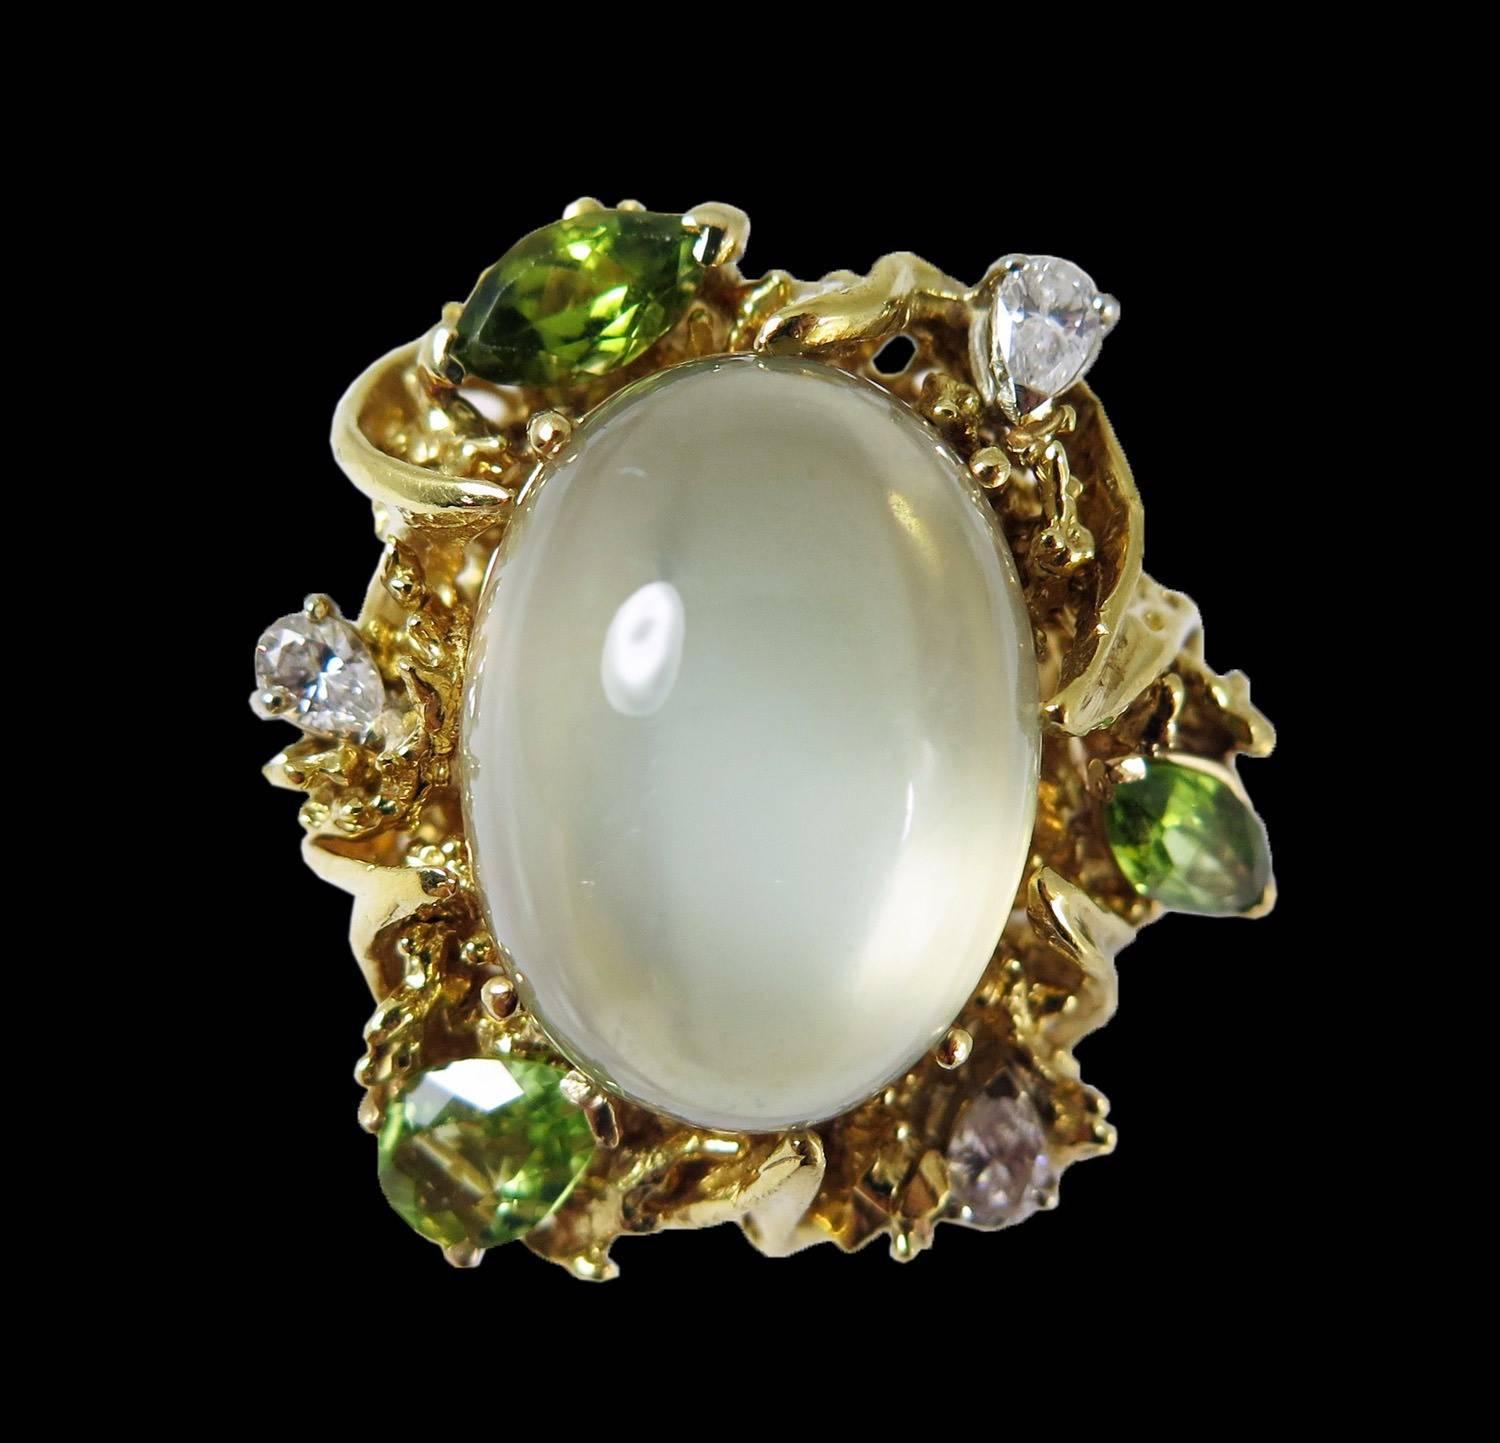 An impressive 1960's 18k yellow gold free-form ring centered around a large cabochon moonstone with a milky translucency.
The large 19ct cabochon moonstone is surrounded by diamonds and green peridot, all set in a handcrafted organic free form